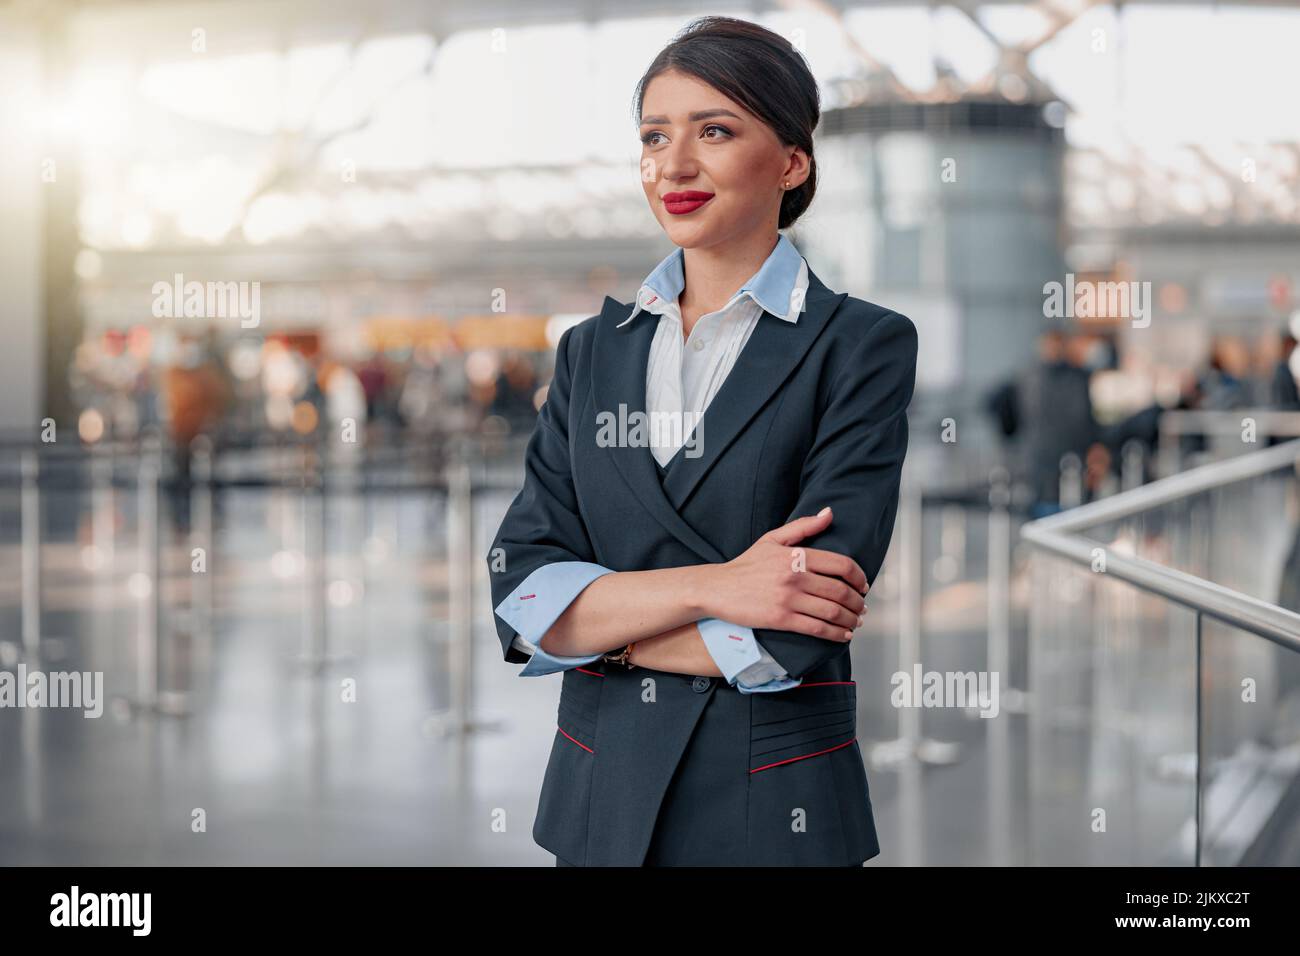 Beautiful stewardess with arms crossed looking away in airport terminal Stock Photo